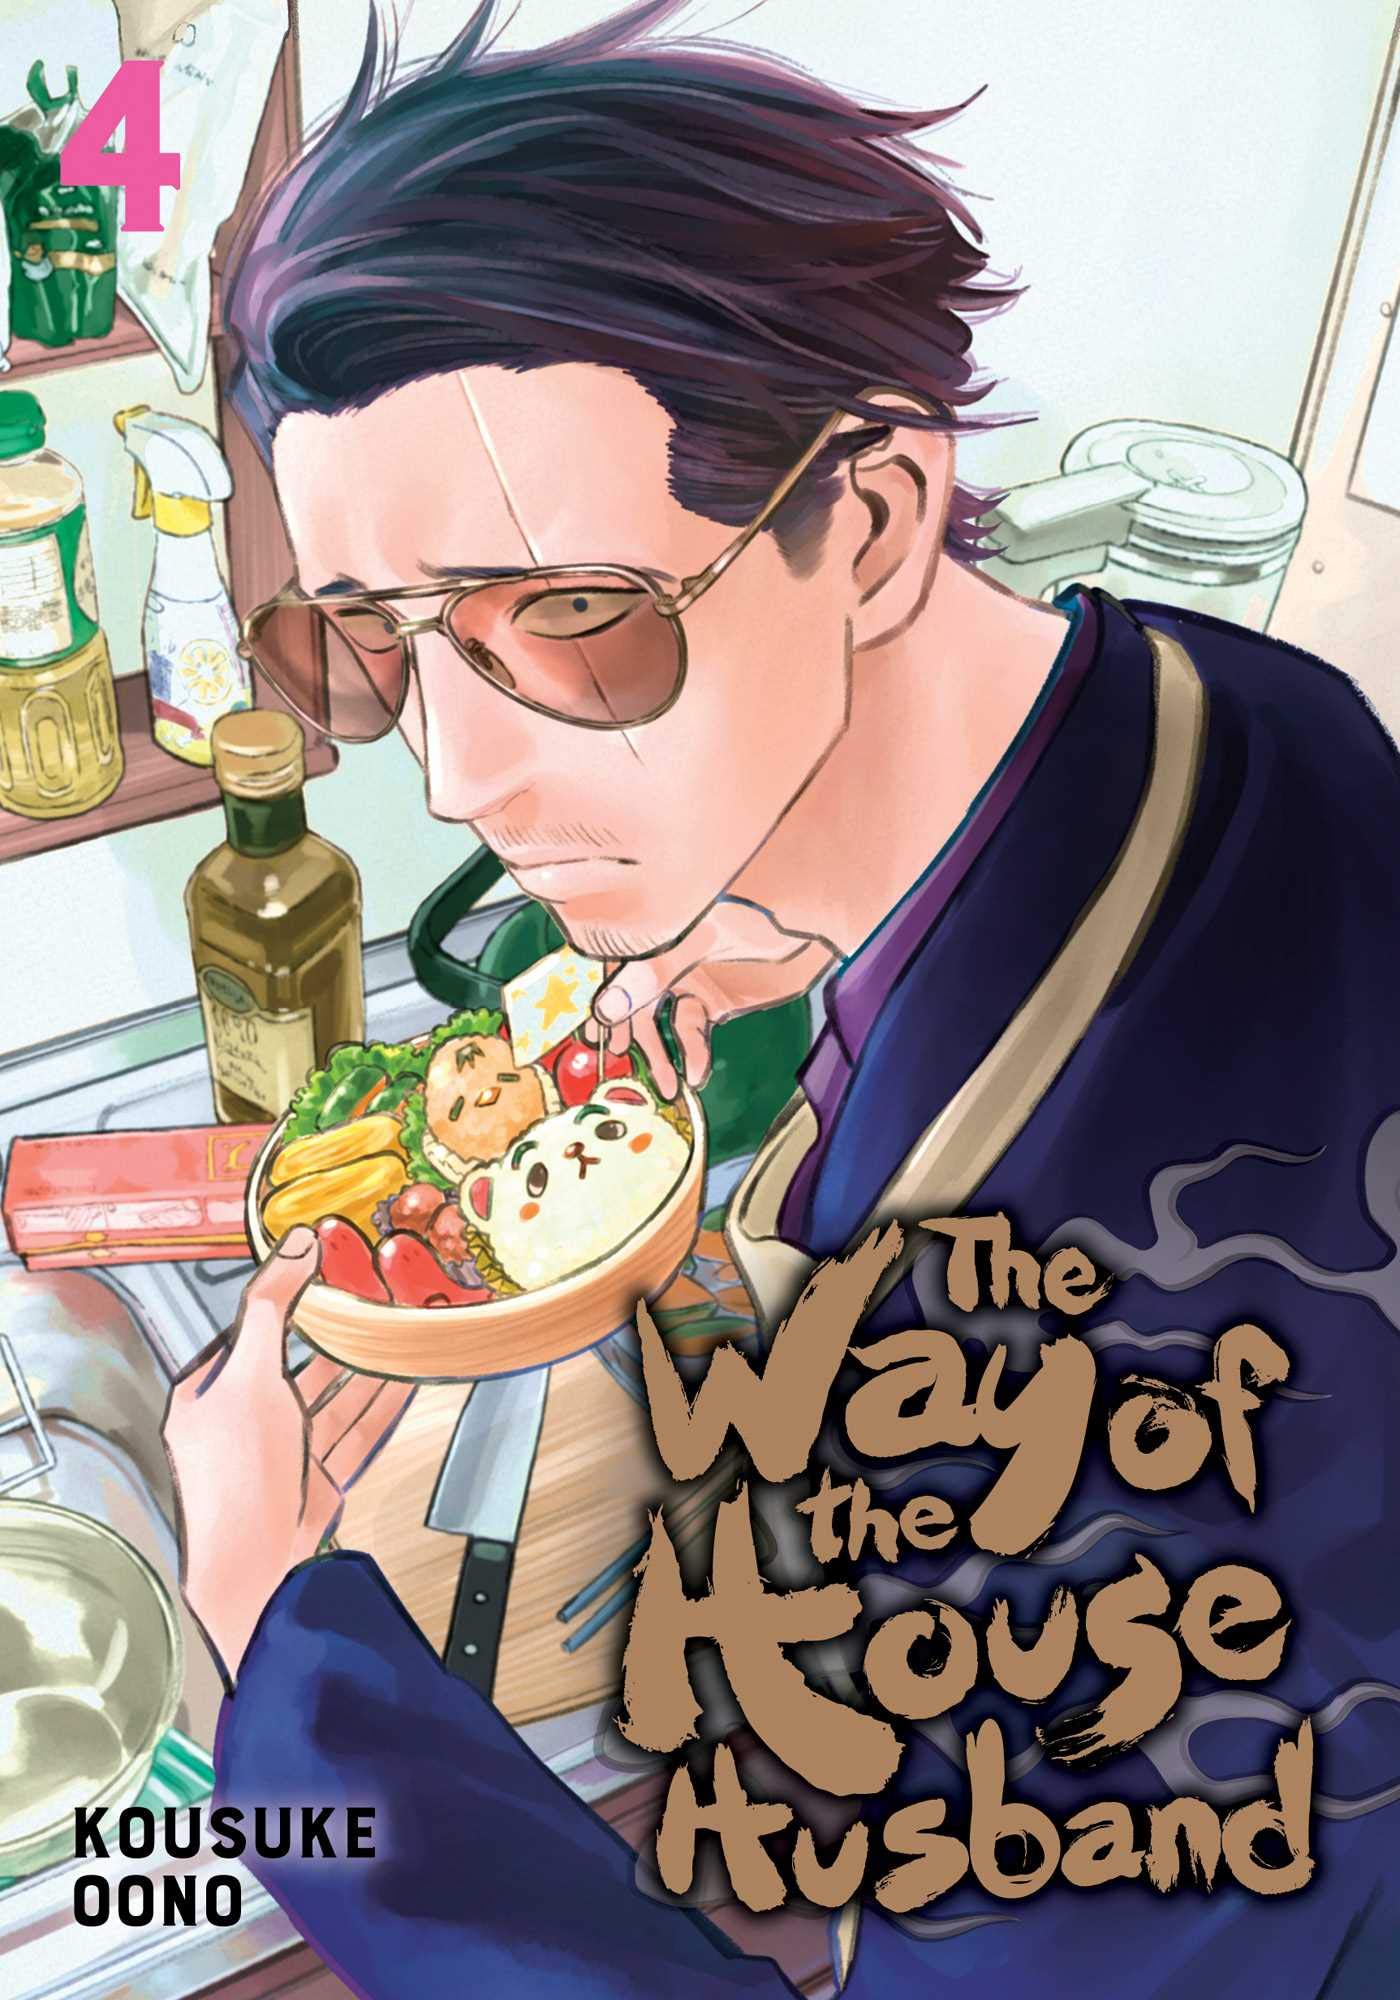 The Way of the Househusband - Volume 4